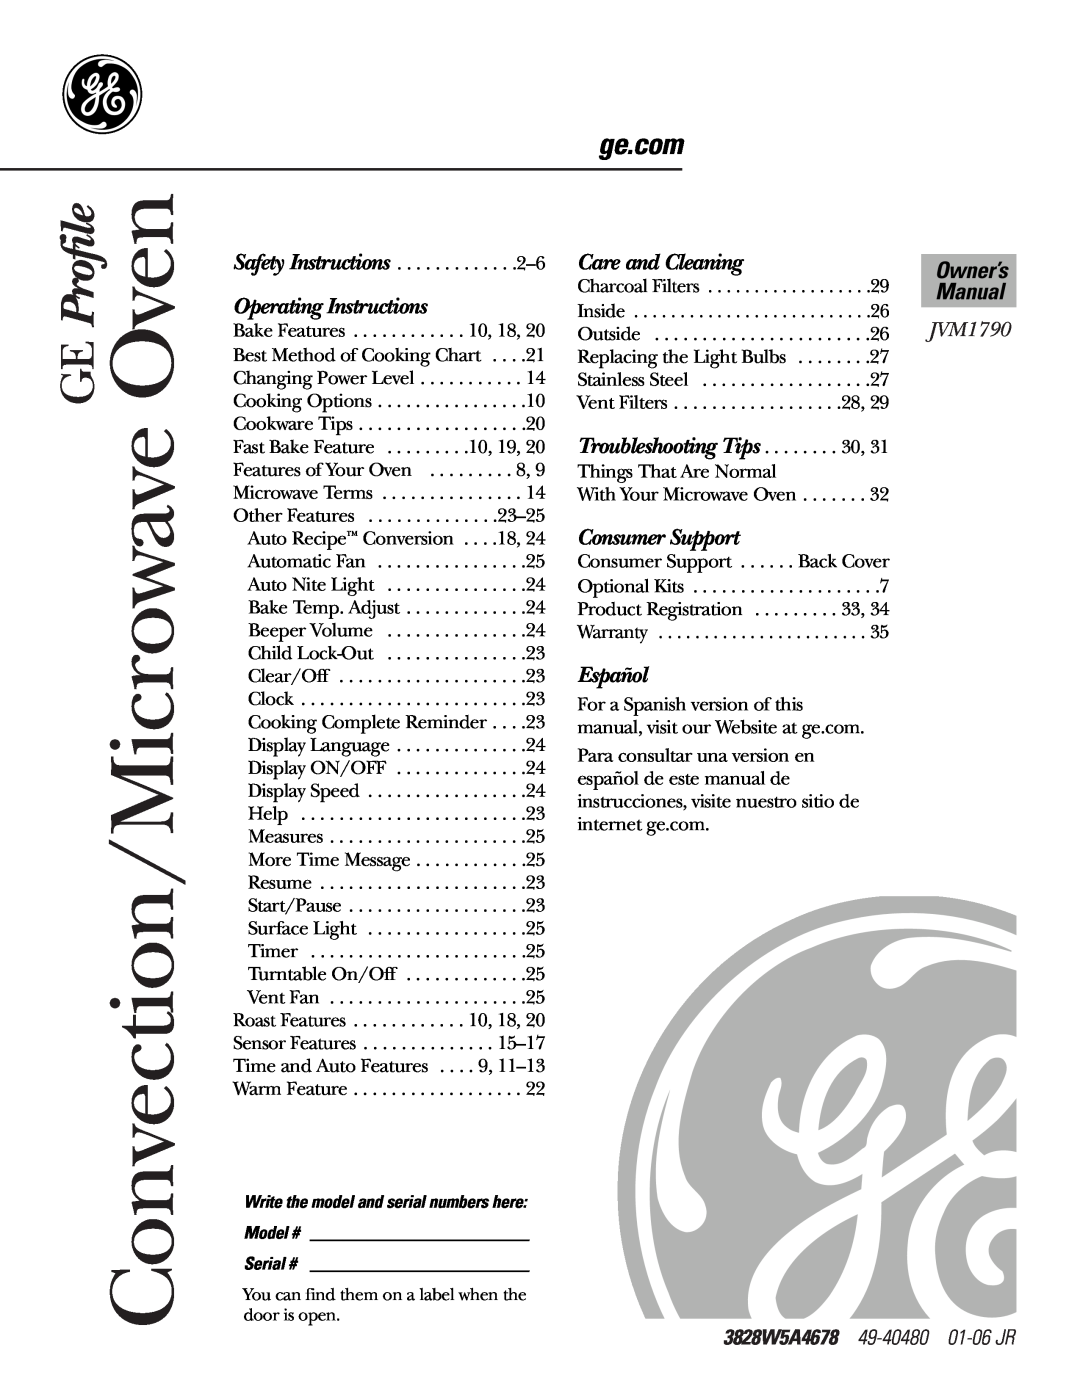 GE JVM1790 owner manual ge.com, Operating Instructions, Care and Cleaning, Consumer Support, Español 